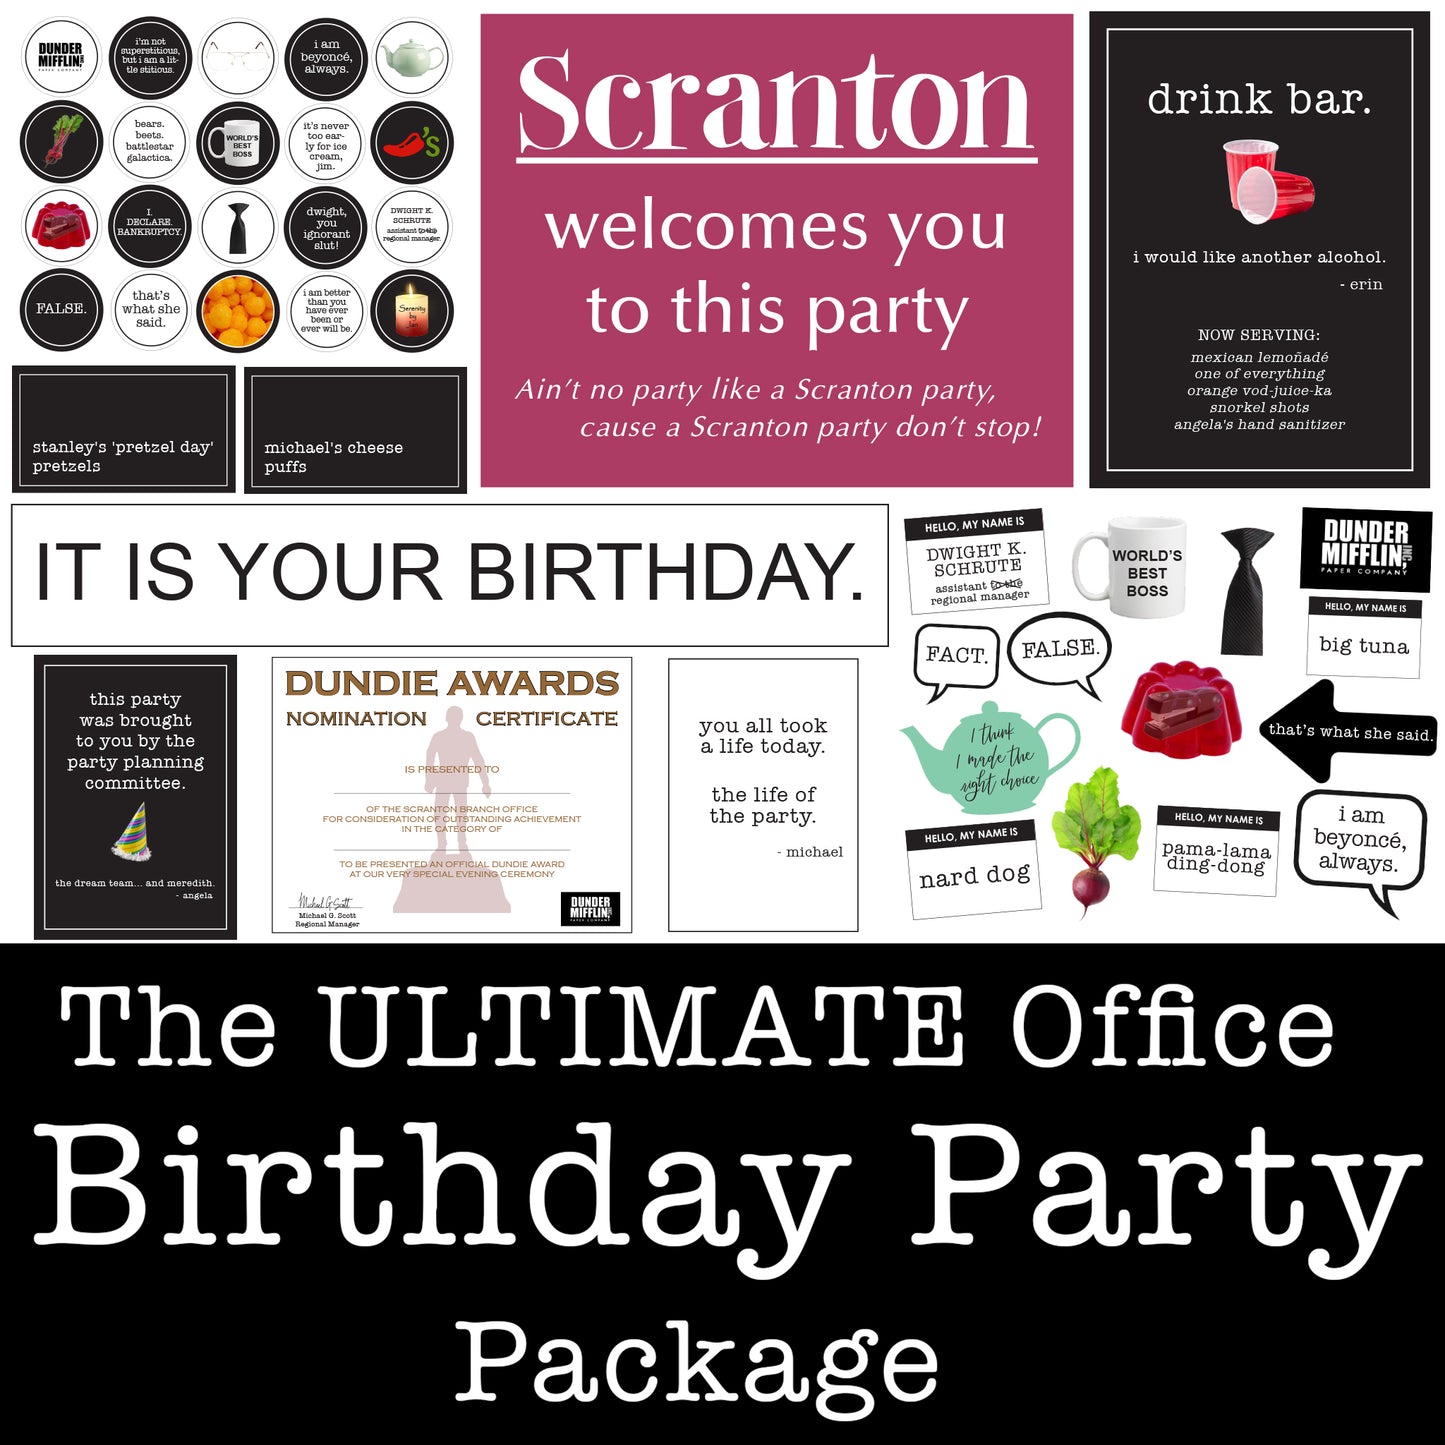 The Ultimate Office Birthday Party Printable Package